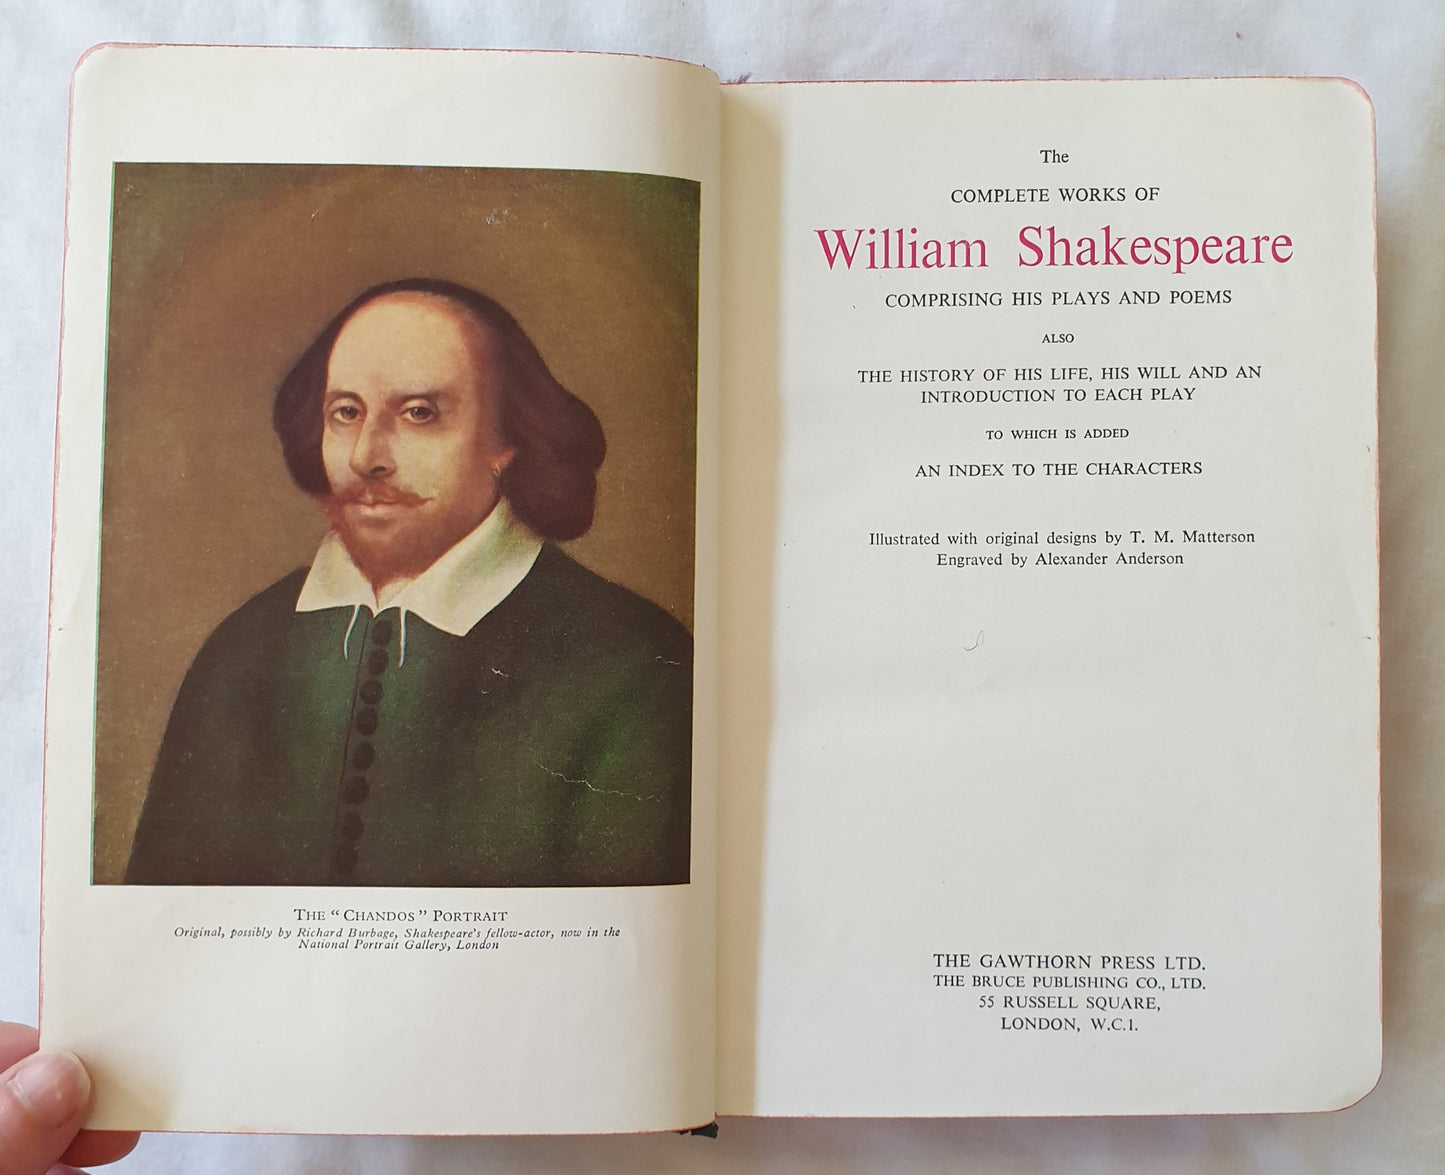 The Complete Works of William Shakespeare by T. M. Matterson and Alexander Anderson